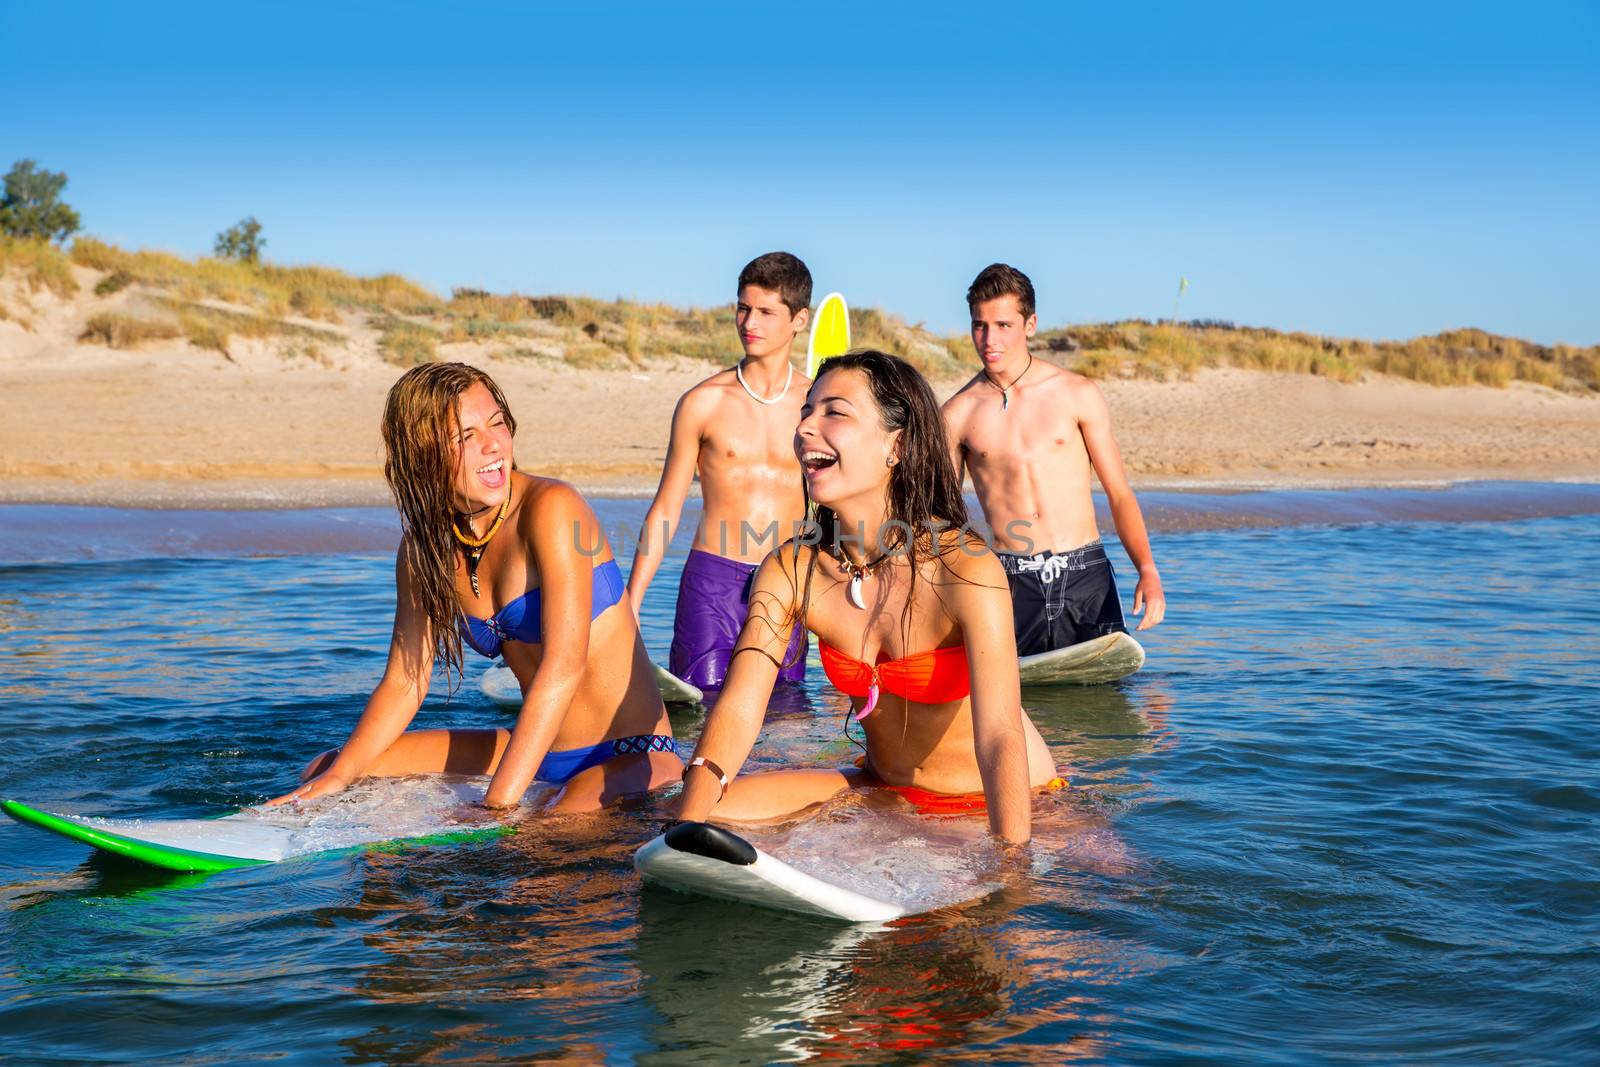 Teenager surfer boys and girls swimming ove surfboard by lunamarina